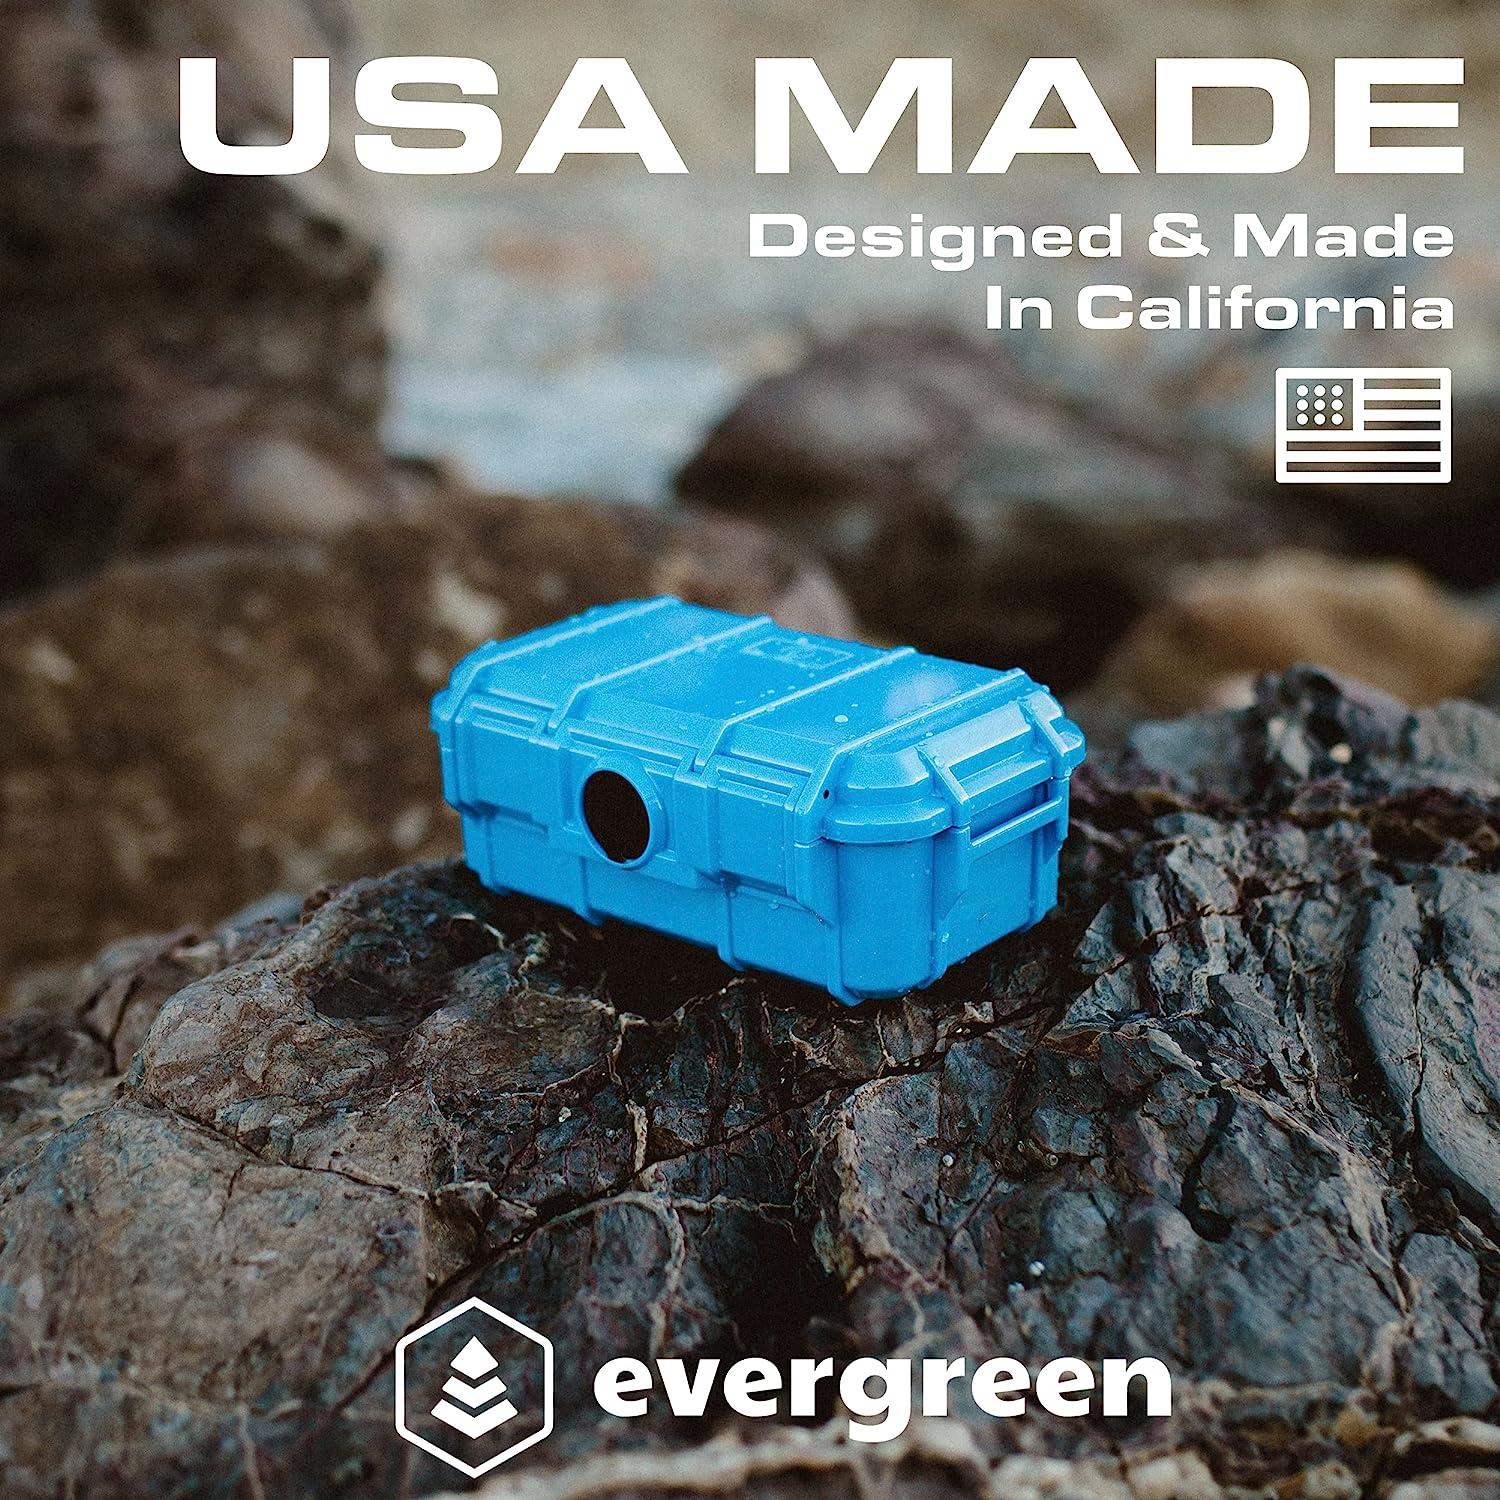 Evergreen 57 Waterproof Dry Box Protective Case - Travel Safe/Mil